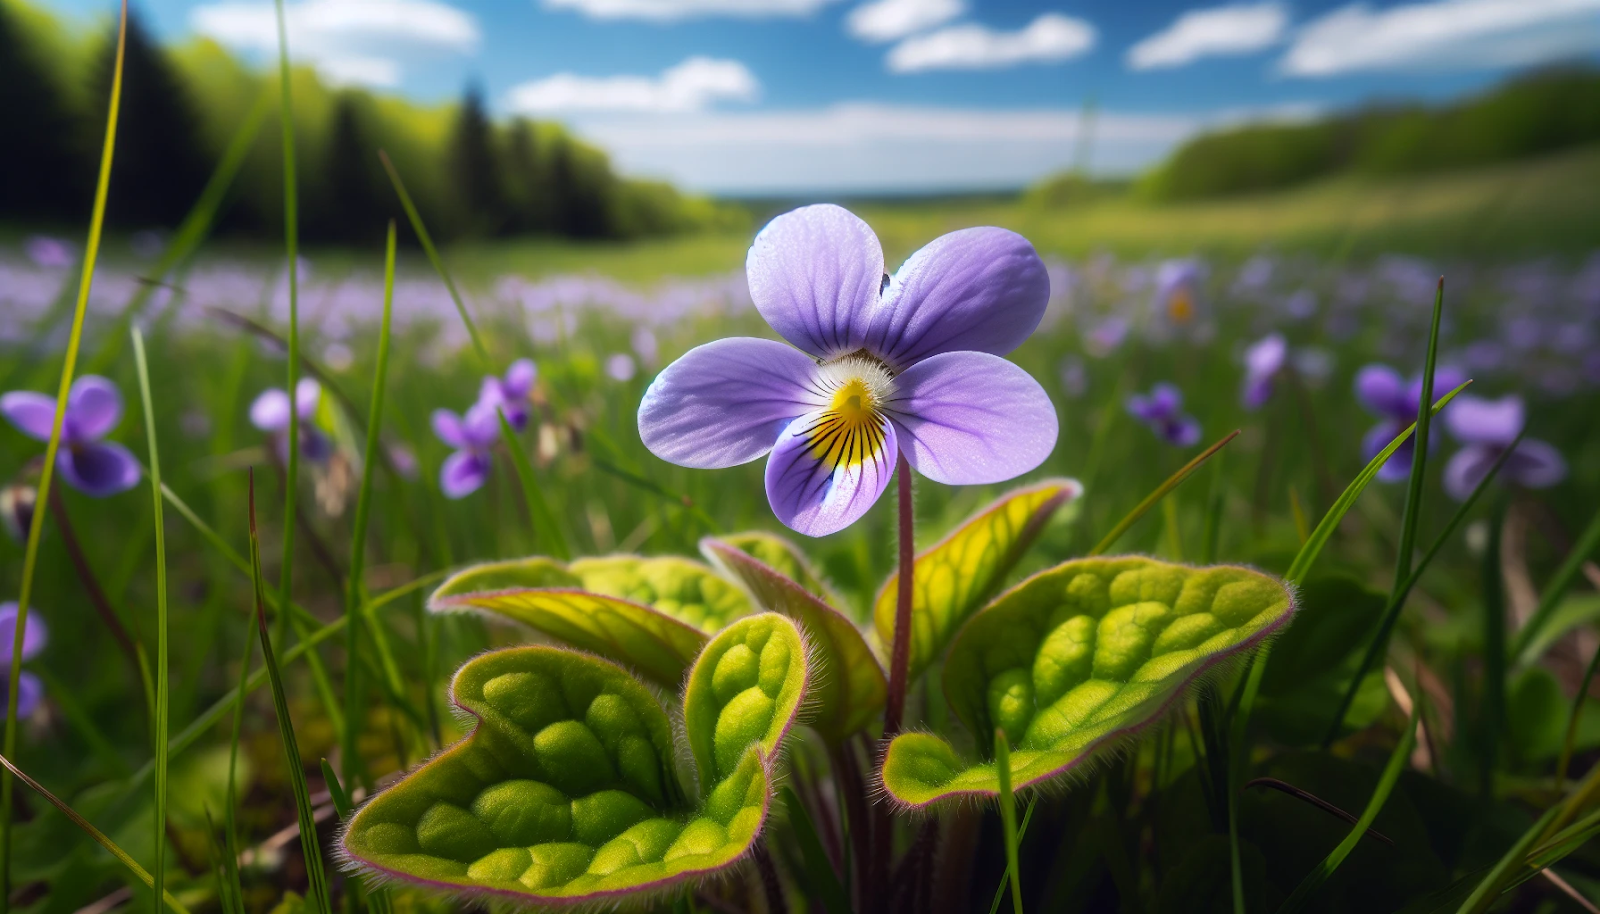 The Common Meadow Violet, New Jersey's state flower, symbolizing innocence and spirituality